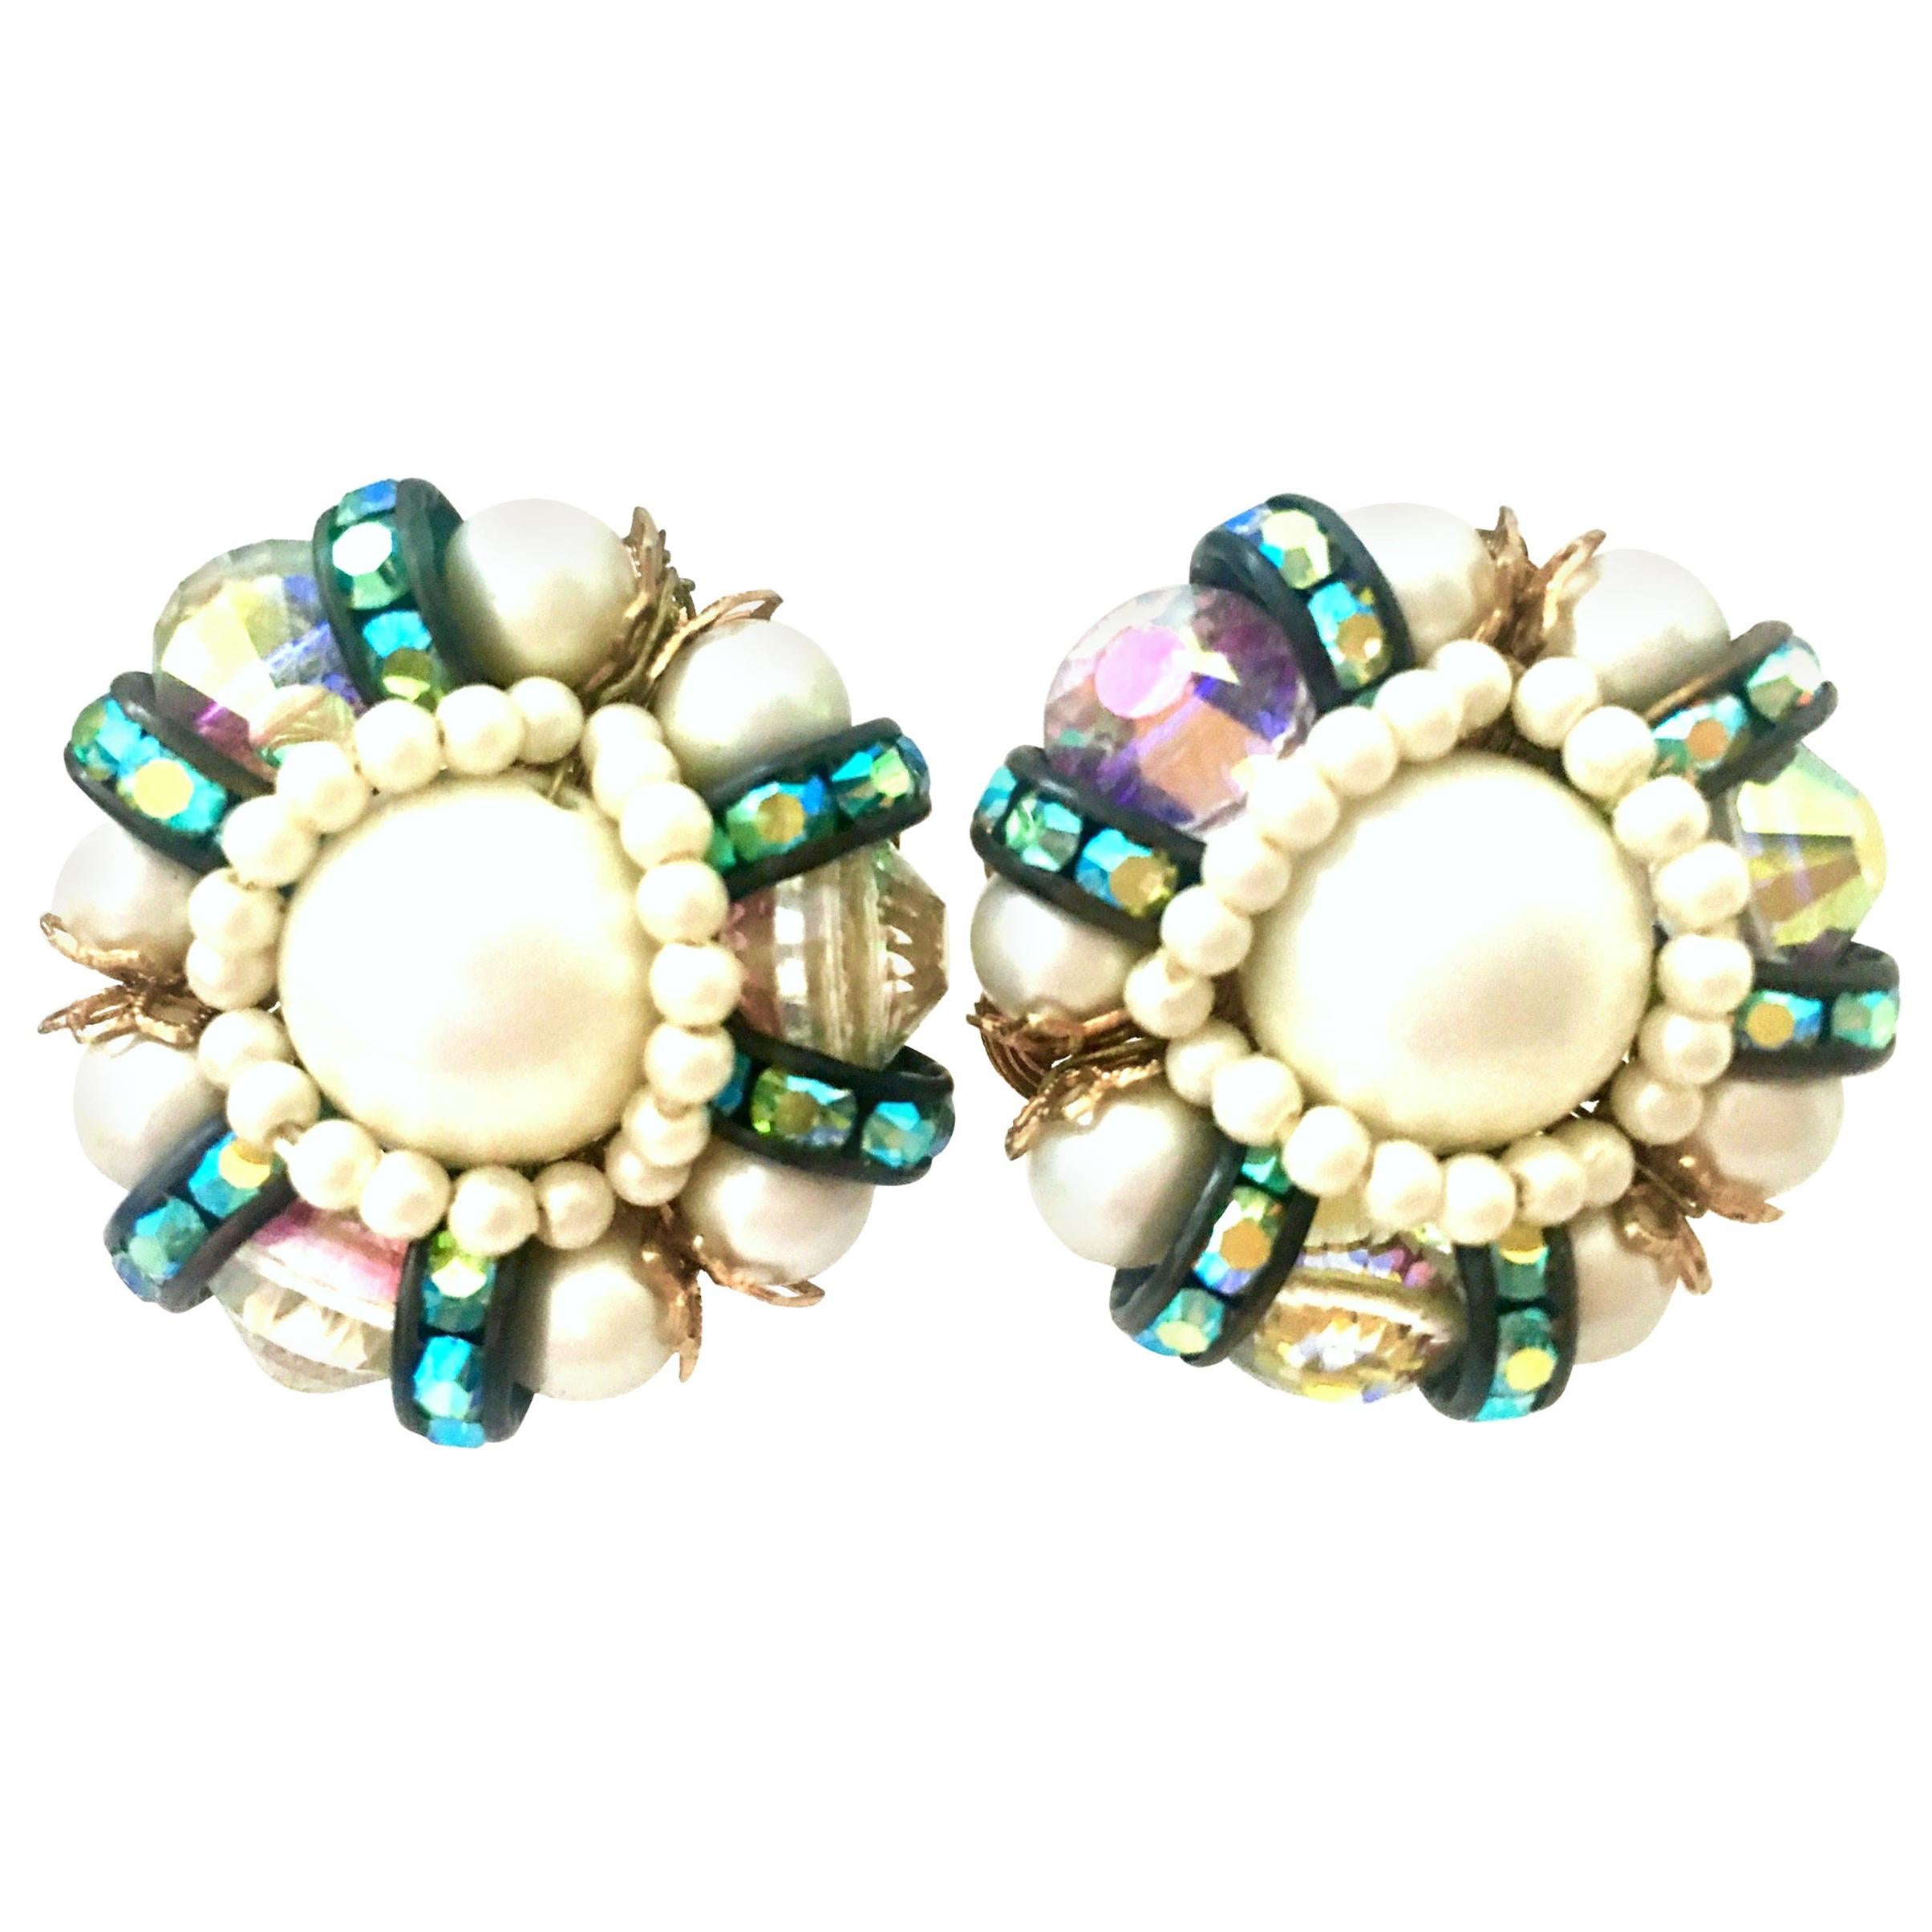 1950'S Pair Of Gold Plate, Faux Pearl, Art Glass & Swarovski Crystal Abstract Floral Earrings By, Hobe. These finely crafted gold plate earrings feature faux pearl milk glass beads with Swarovski Aurora Borealis Crystal. Each gold plate filigree